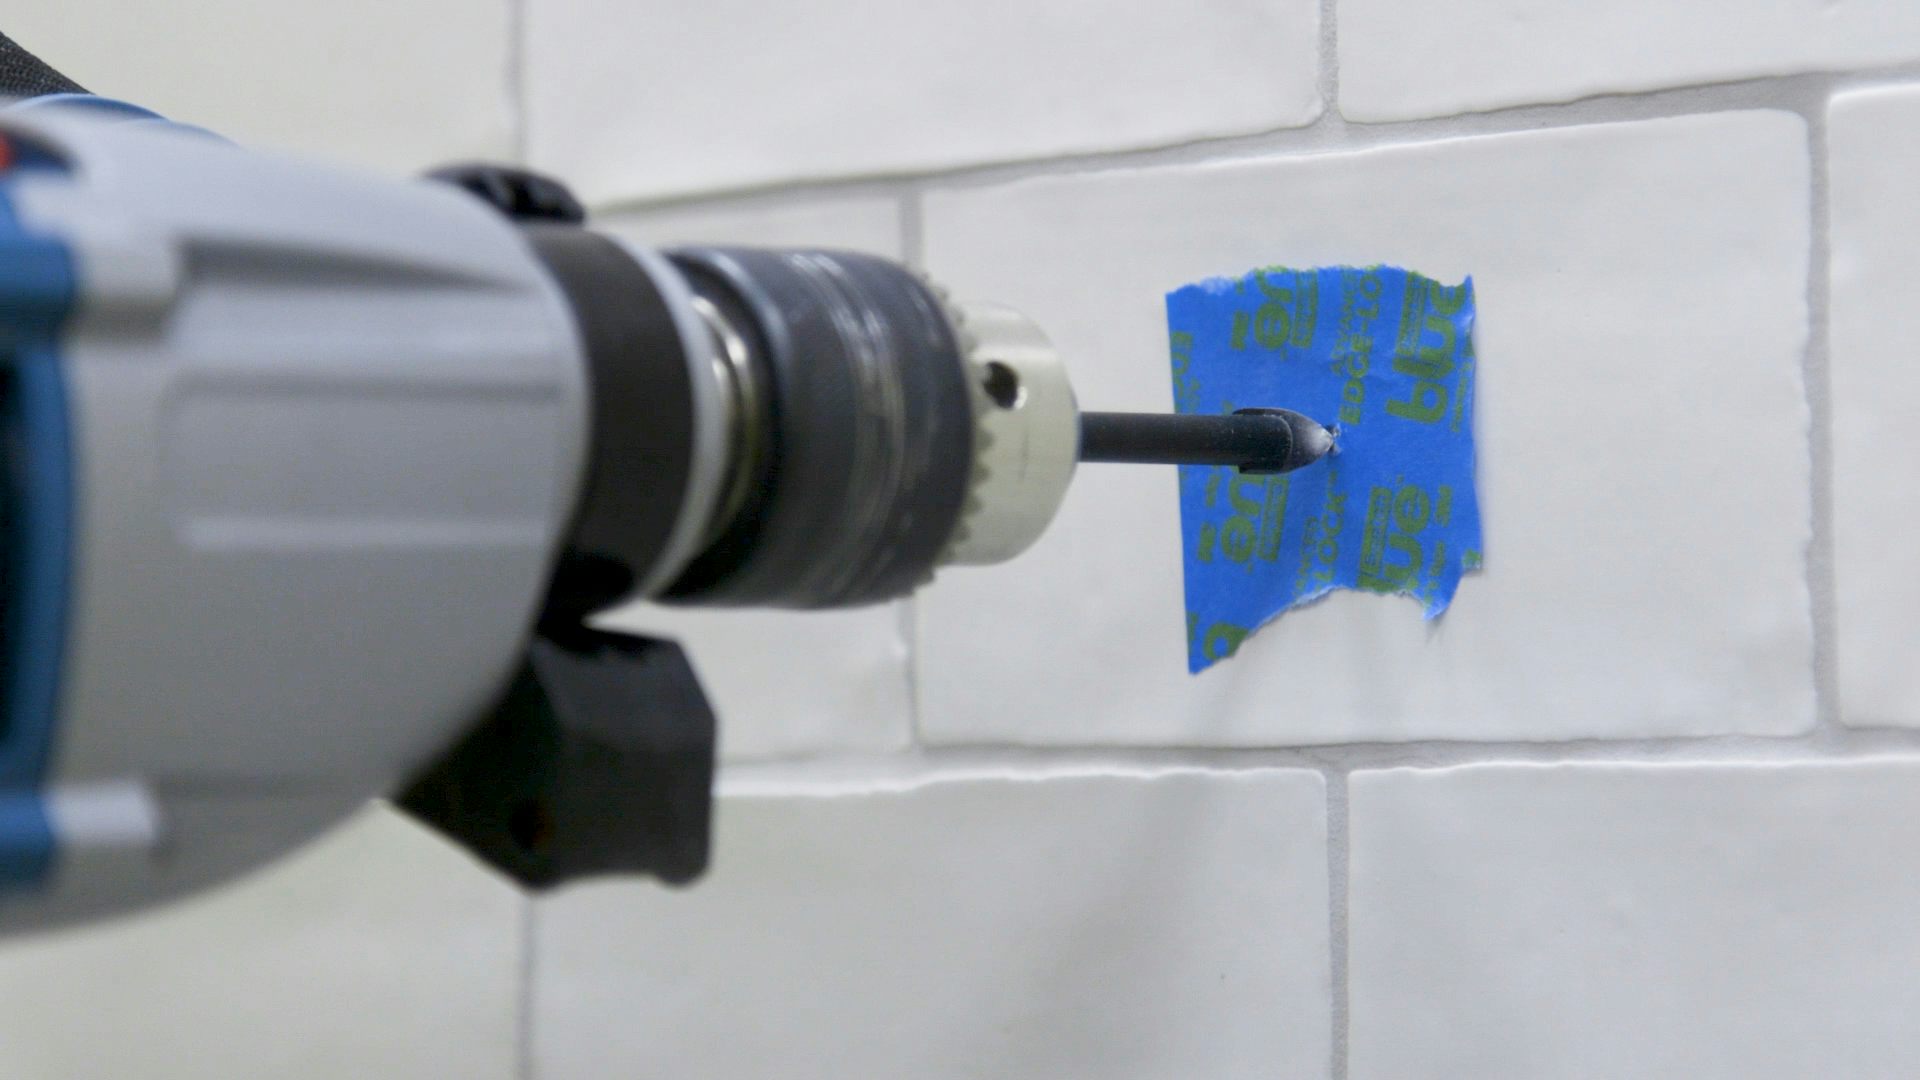 How To Drill Through A Tile Without, Drilling Into Porcelain Tile